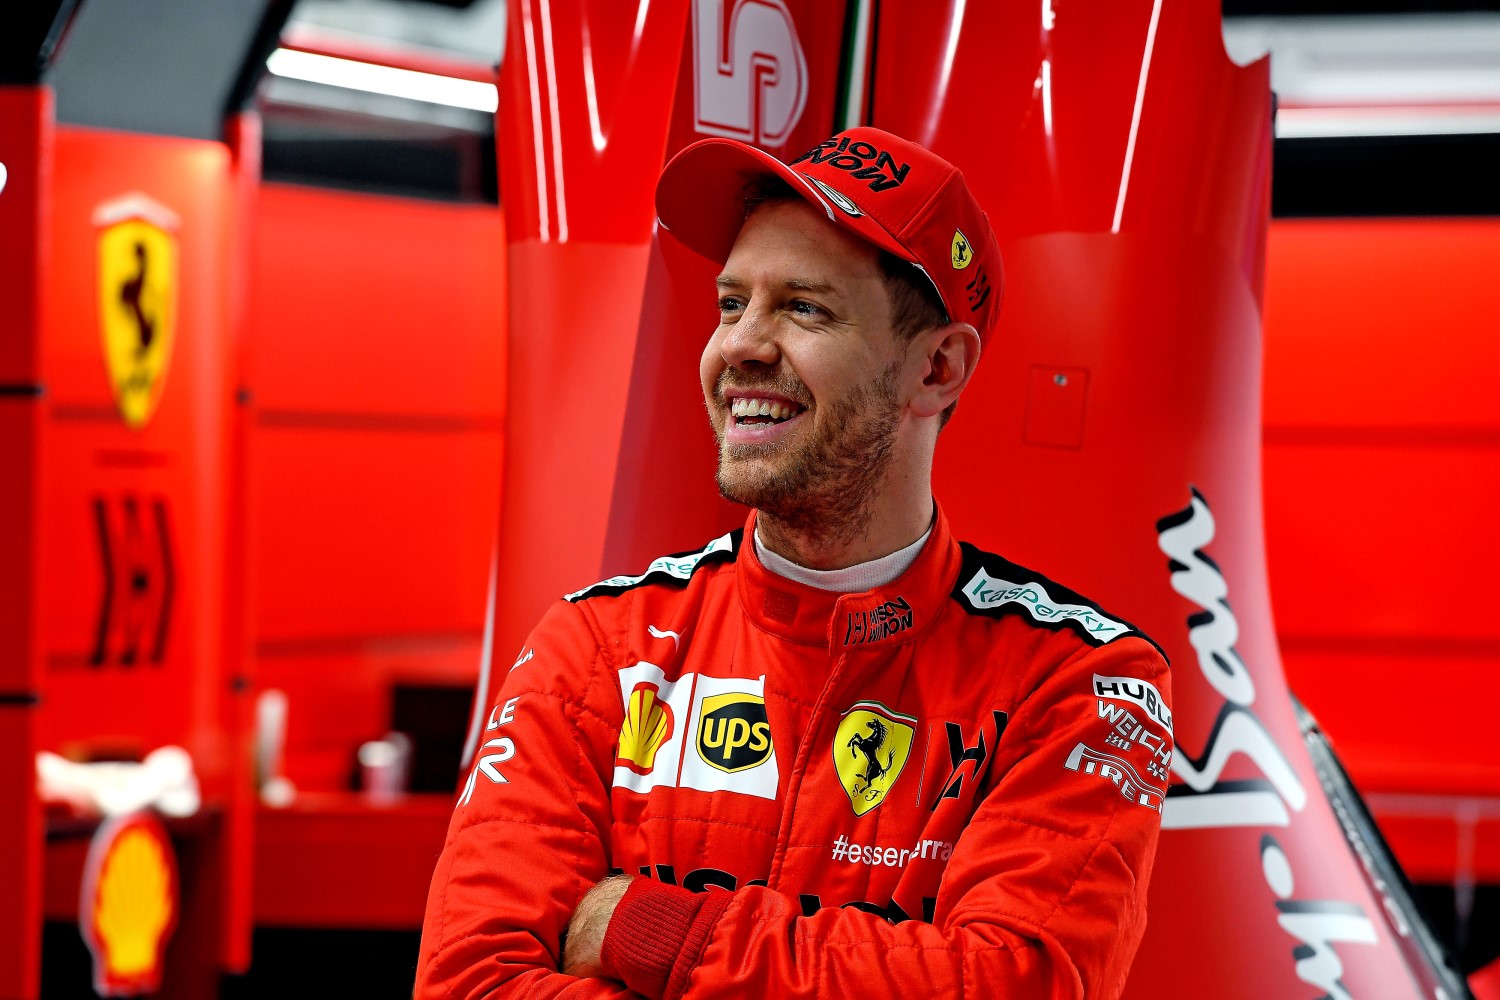 Vettel laughs all the way to the bank with his $2 million Ferrari check after every GP